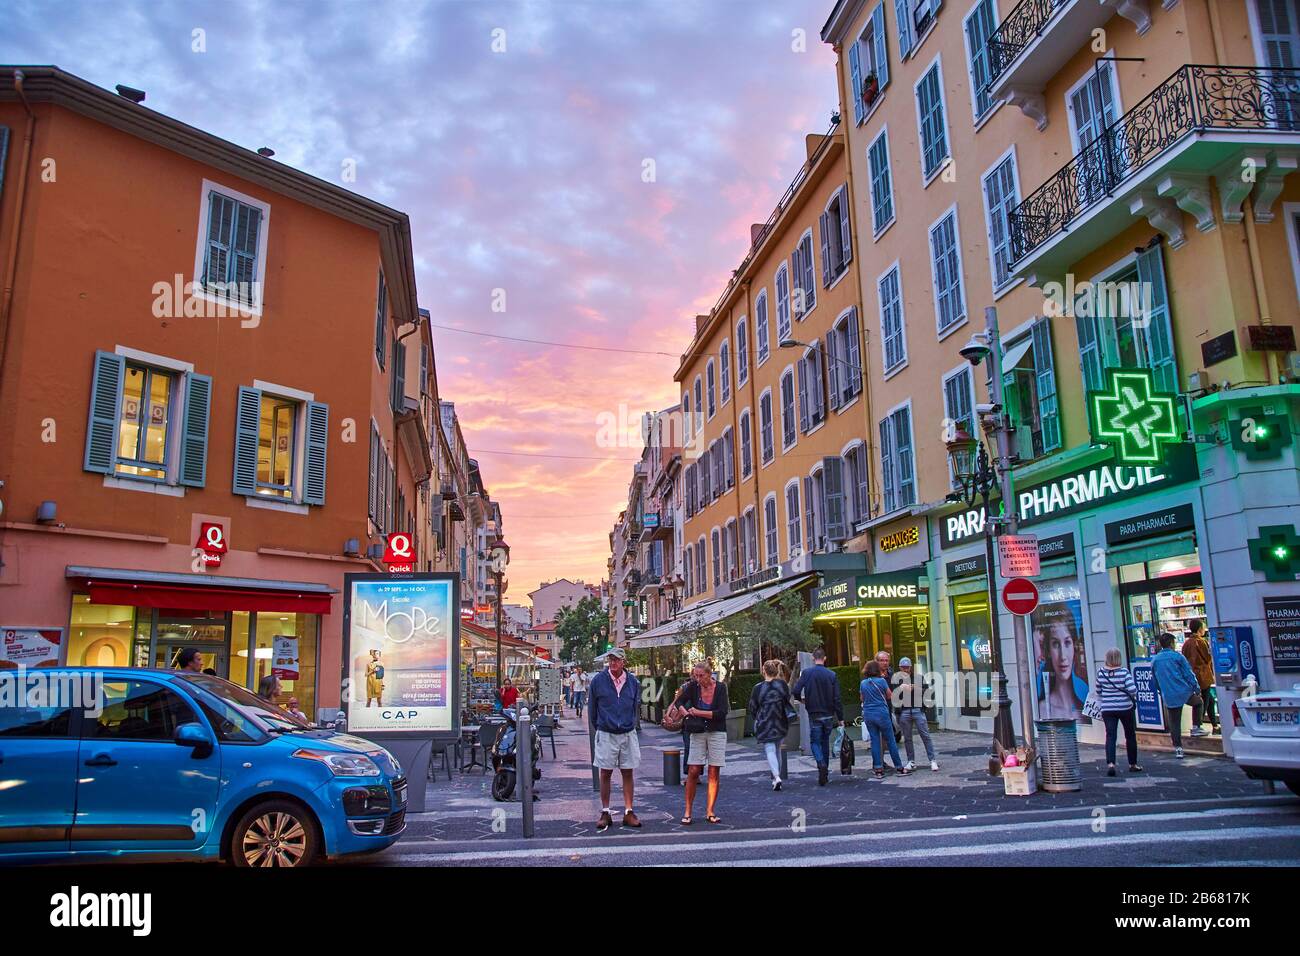 Nice, France - October 5, 2018: City life in an evening in Nice, France. The pedestrian zone with a pharmacy and other shops is idyllically illuminate Stock Photo